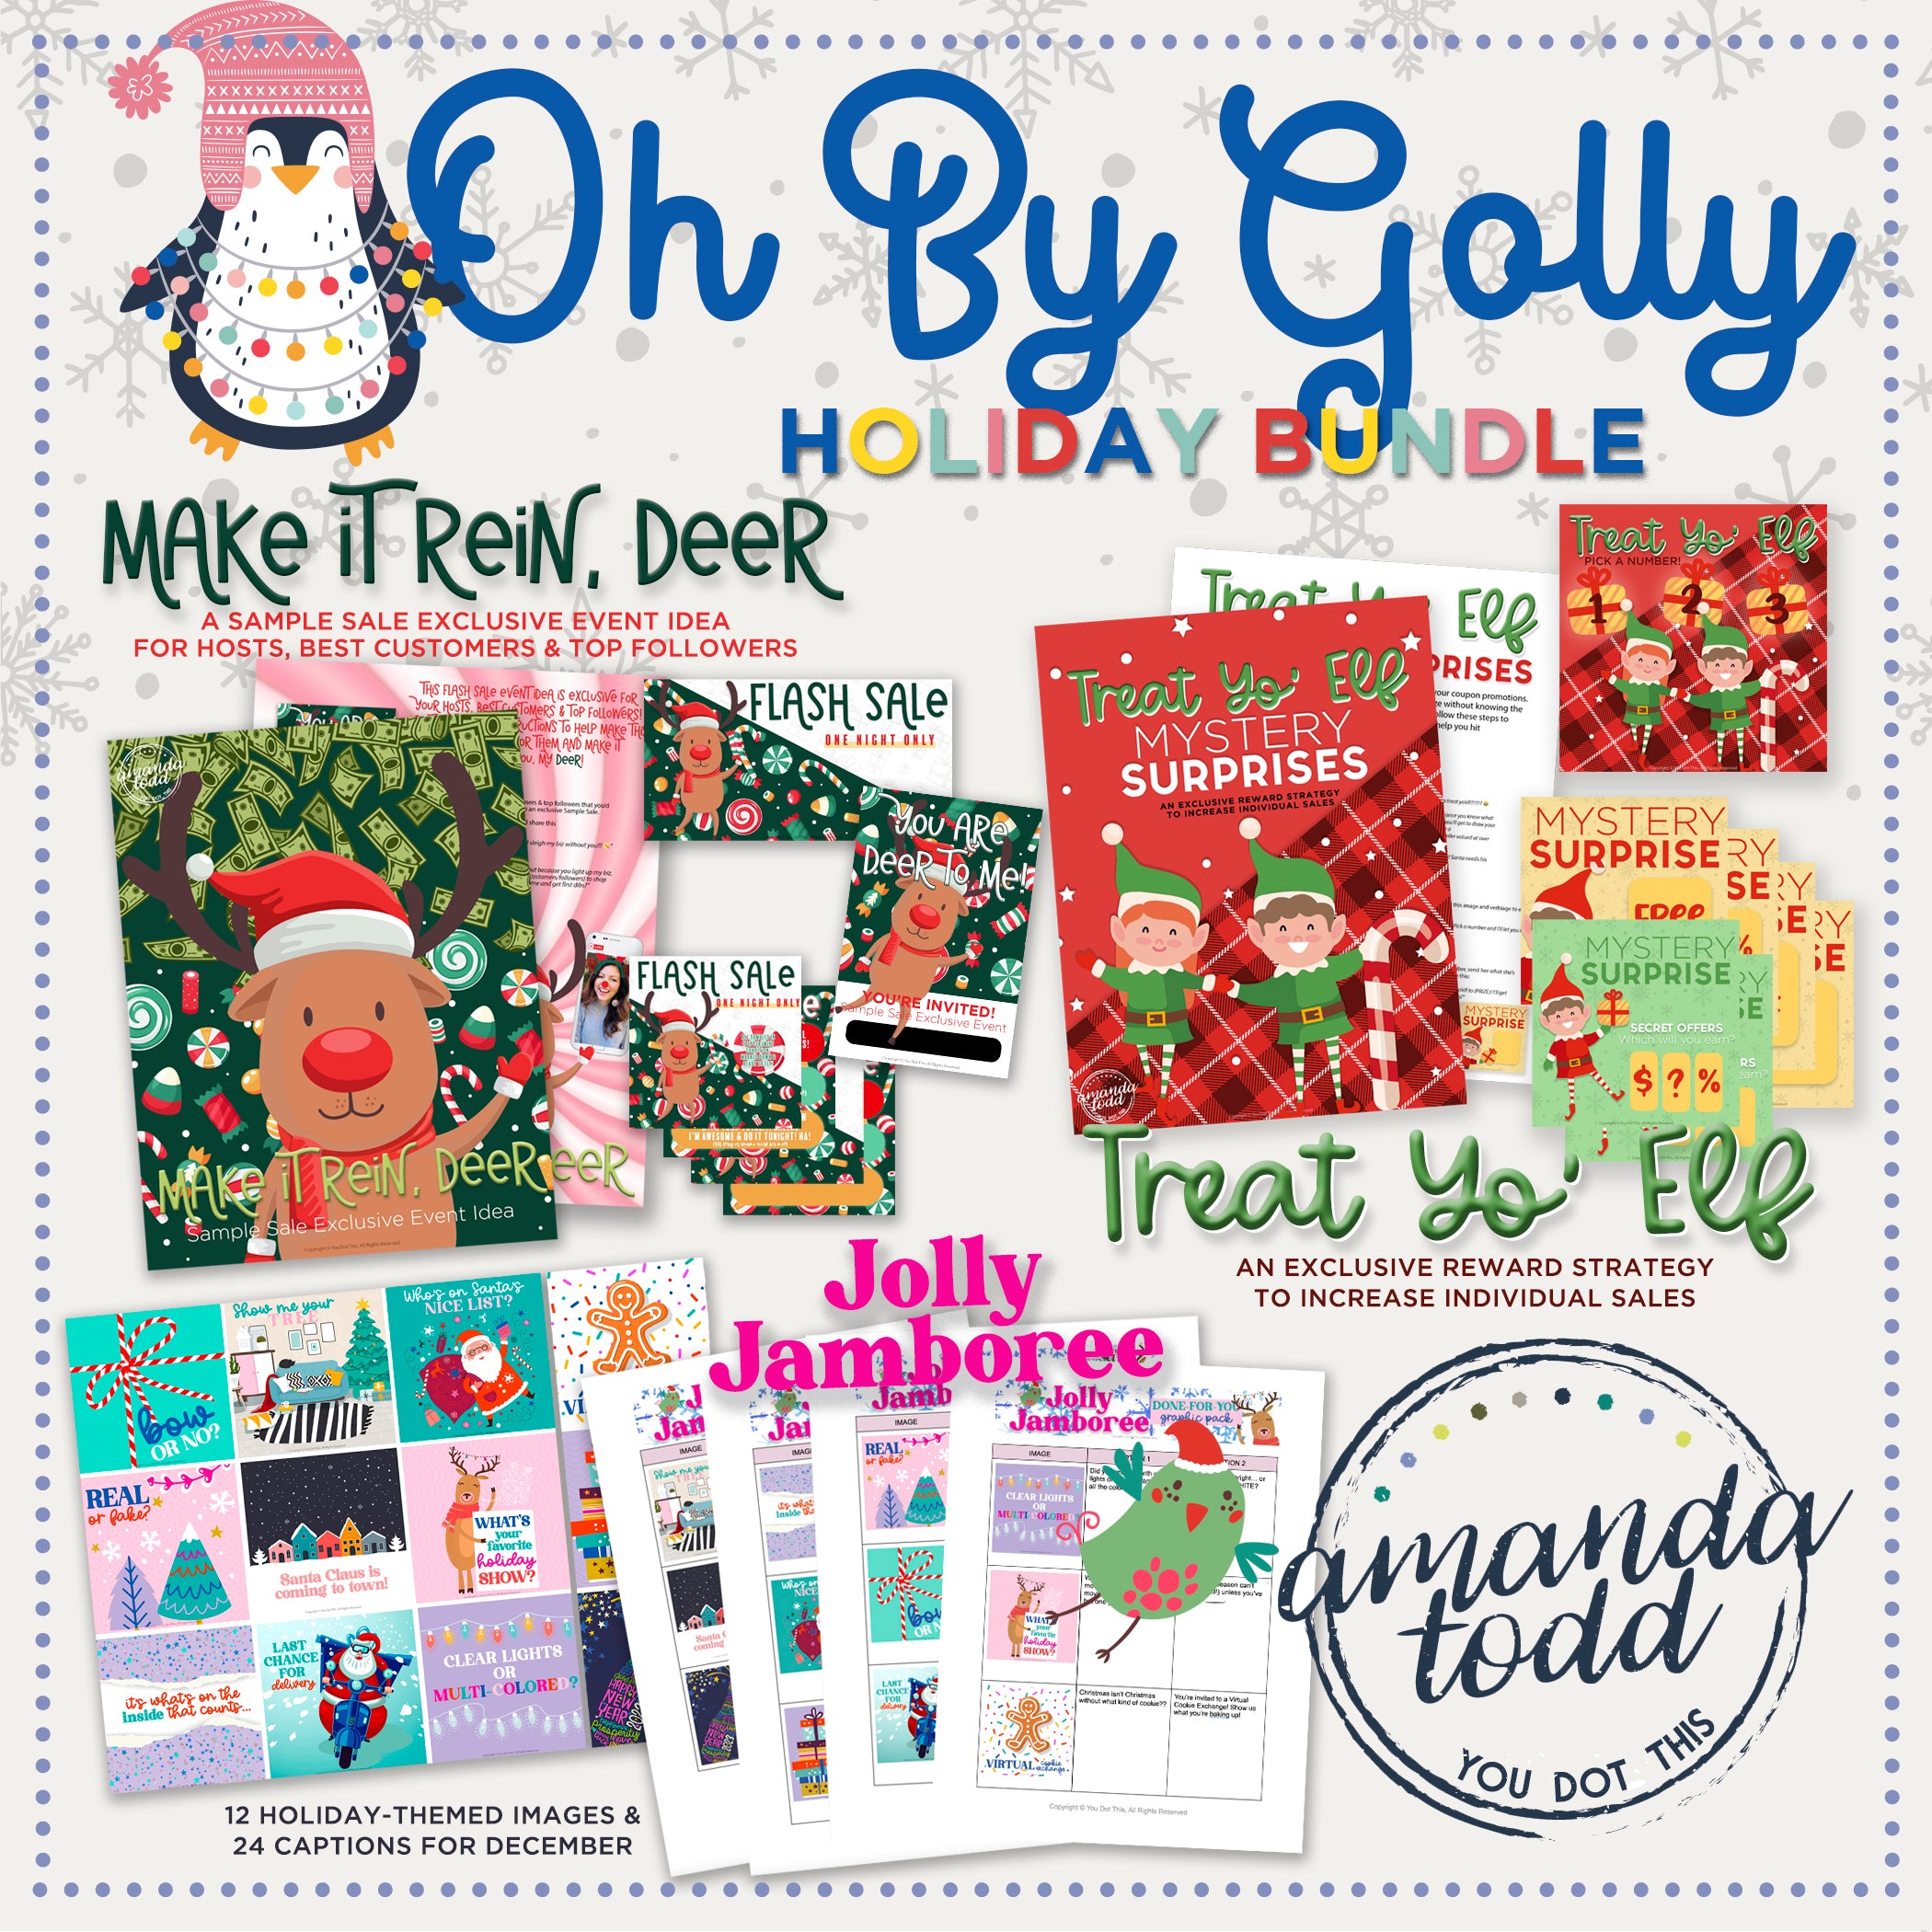 OH BY GOLLY HOLIDAY BUNDLE